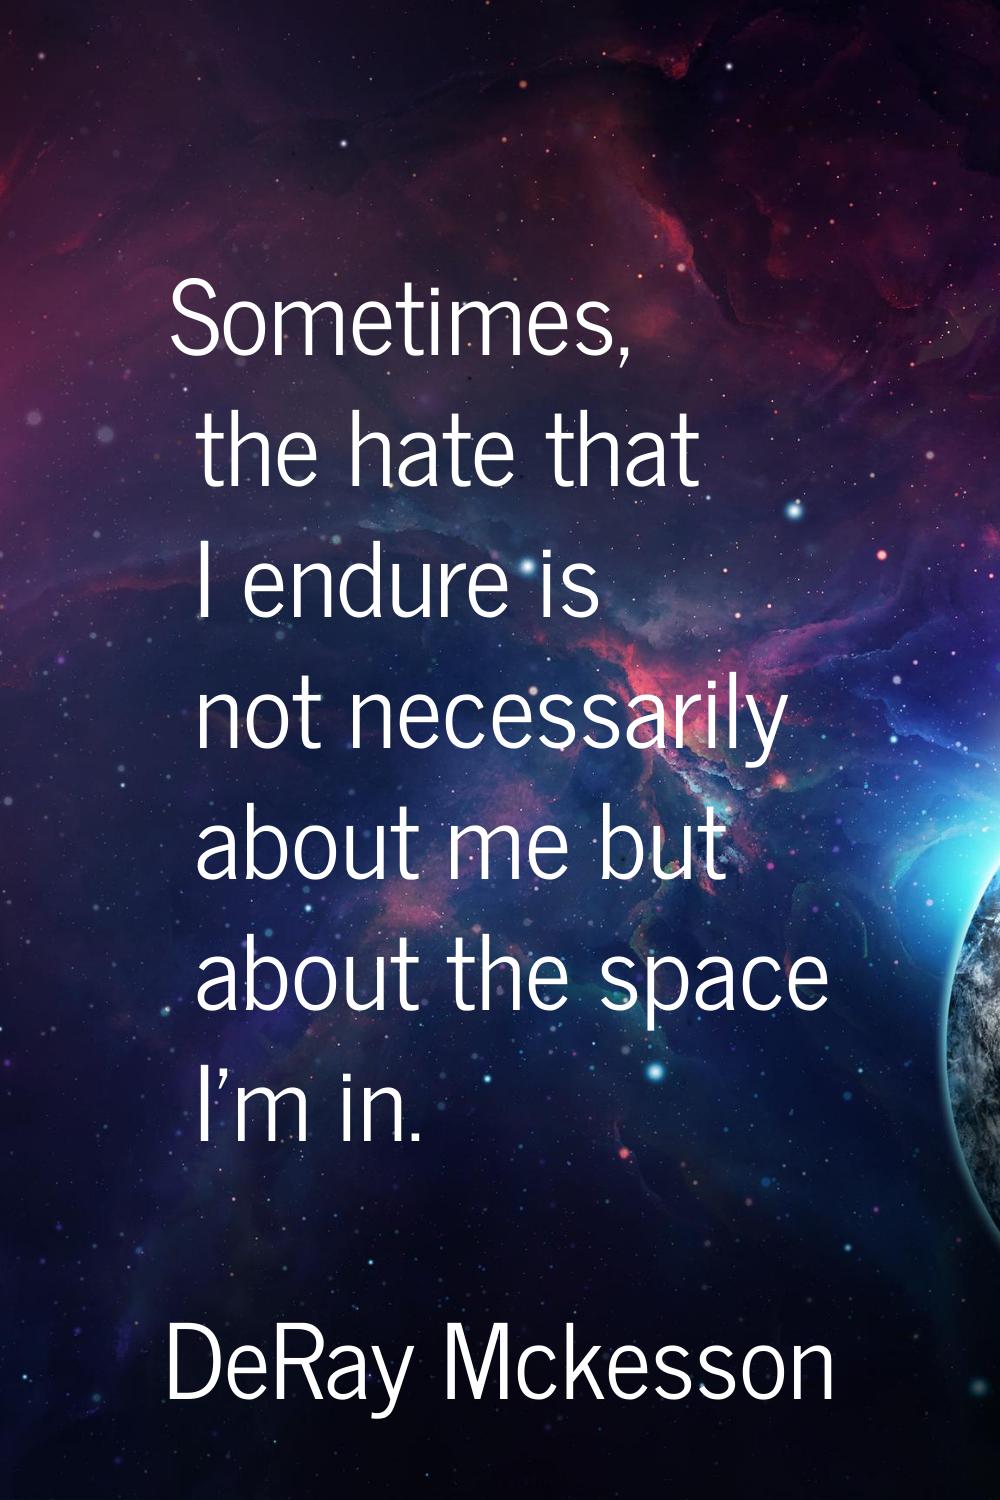 Sometimes, the hate that I endure is not necessarily about me but about the space I'm in.